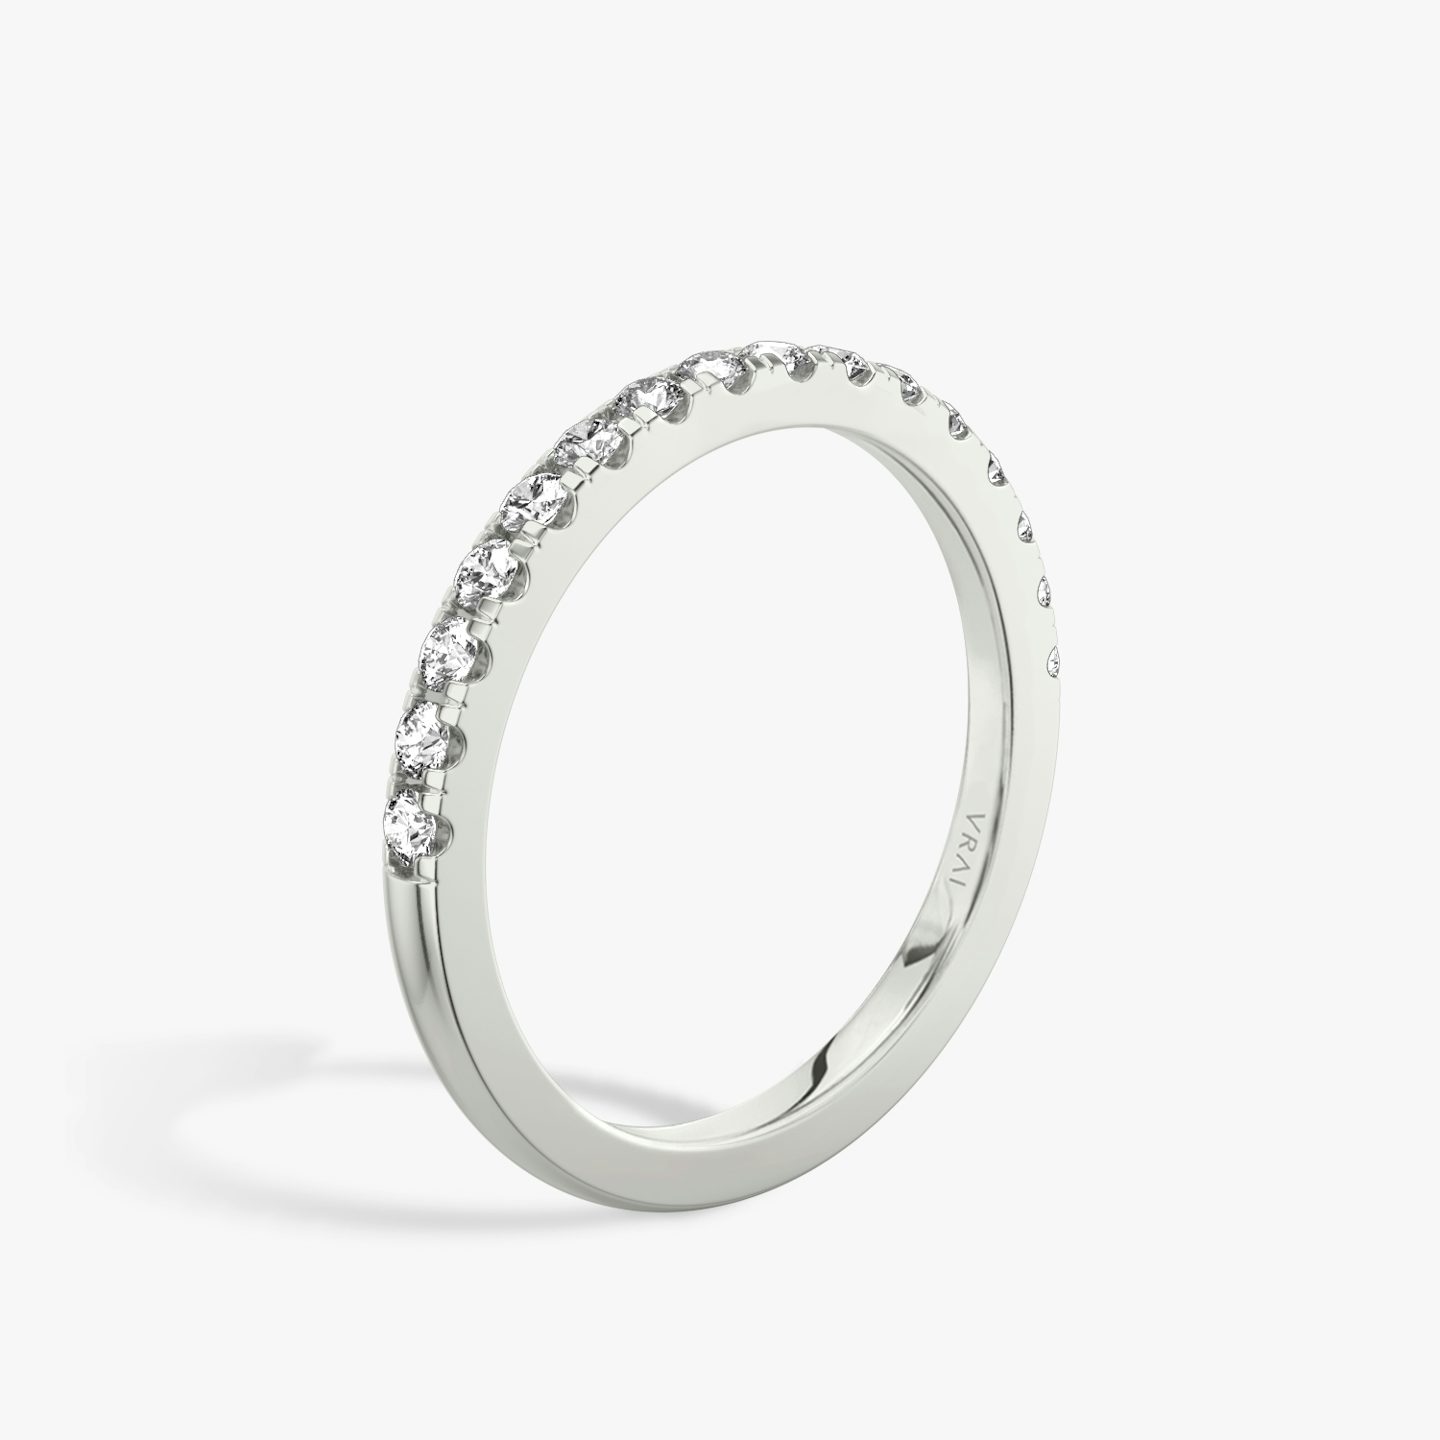 The Half Pavé Band | Round Brilliant | 18k | 18k White Gold | Band width: Large